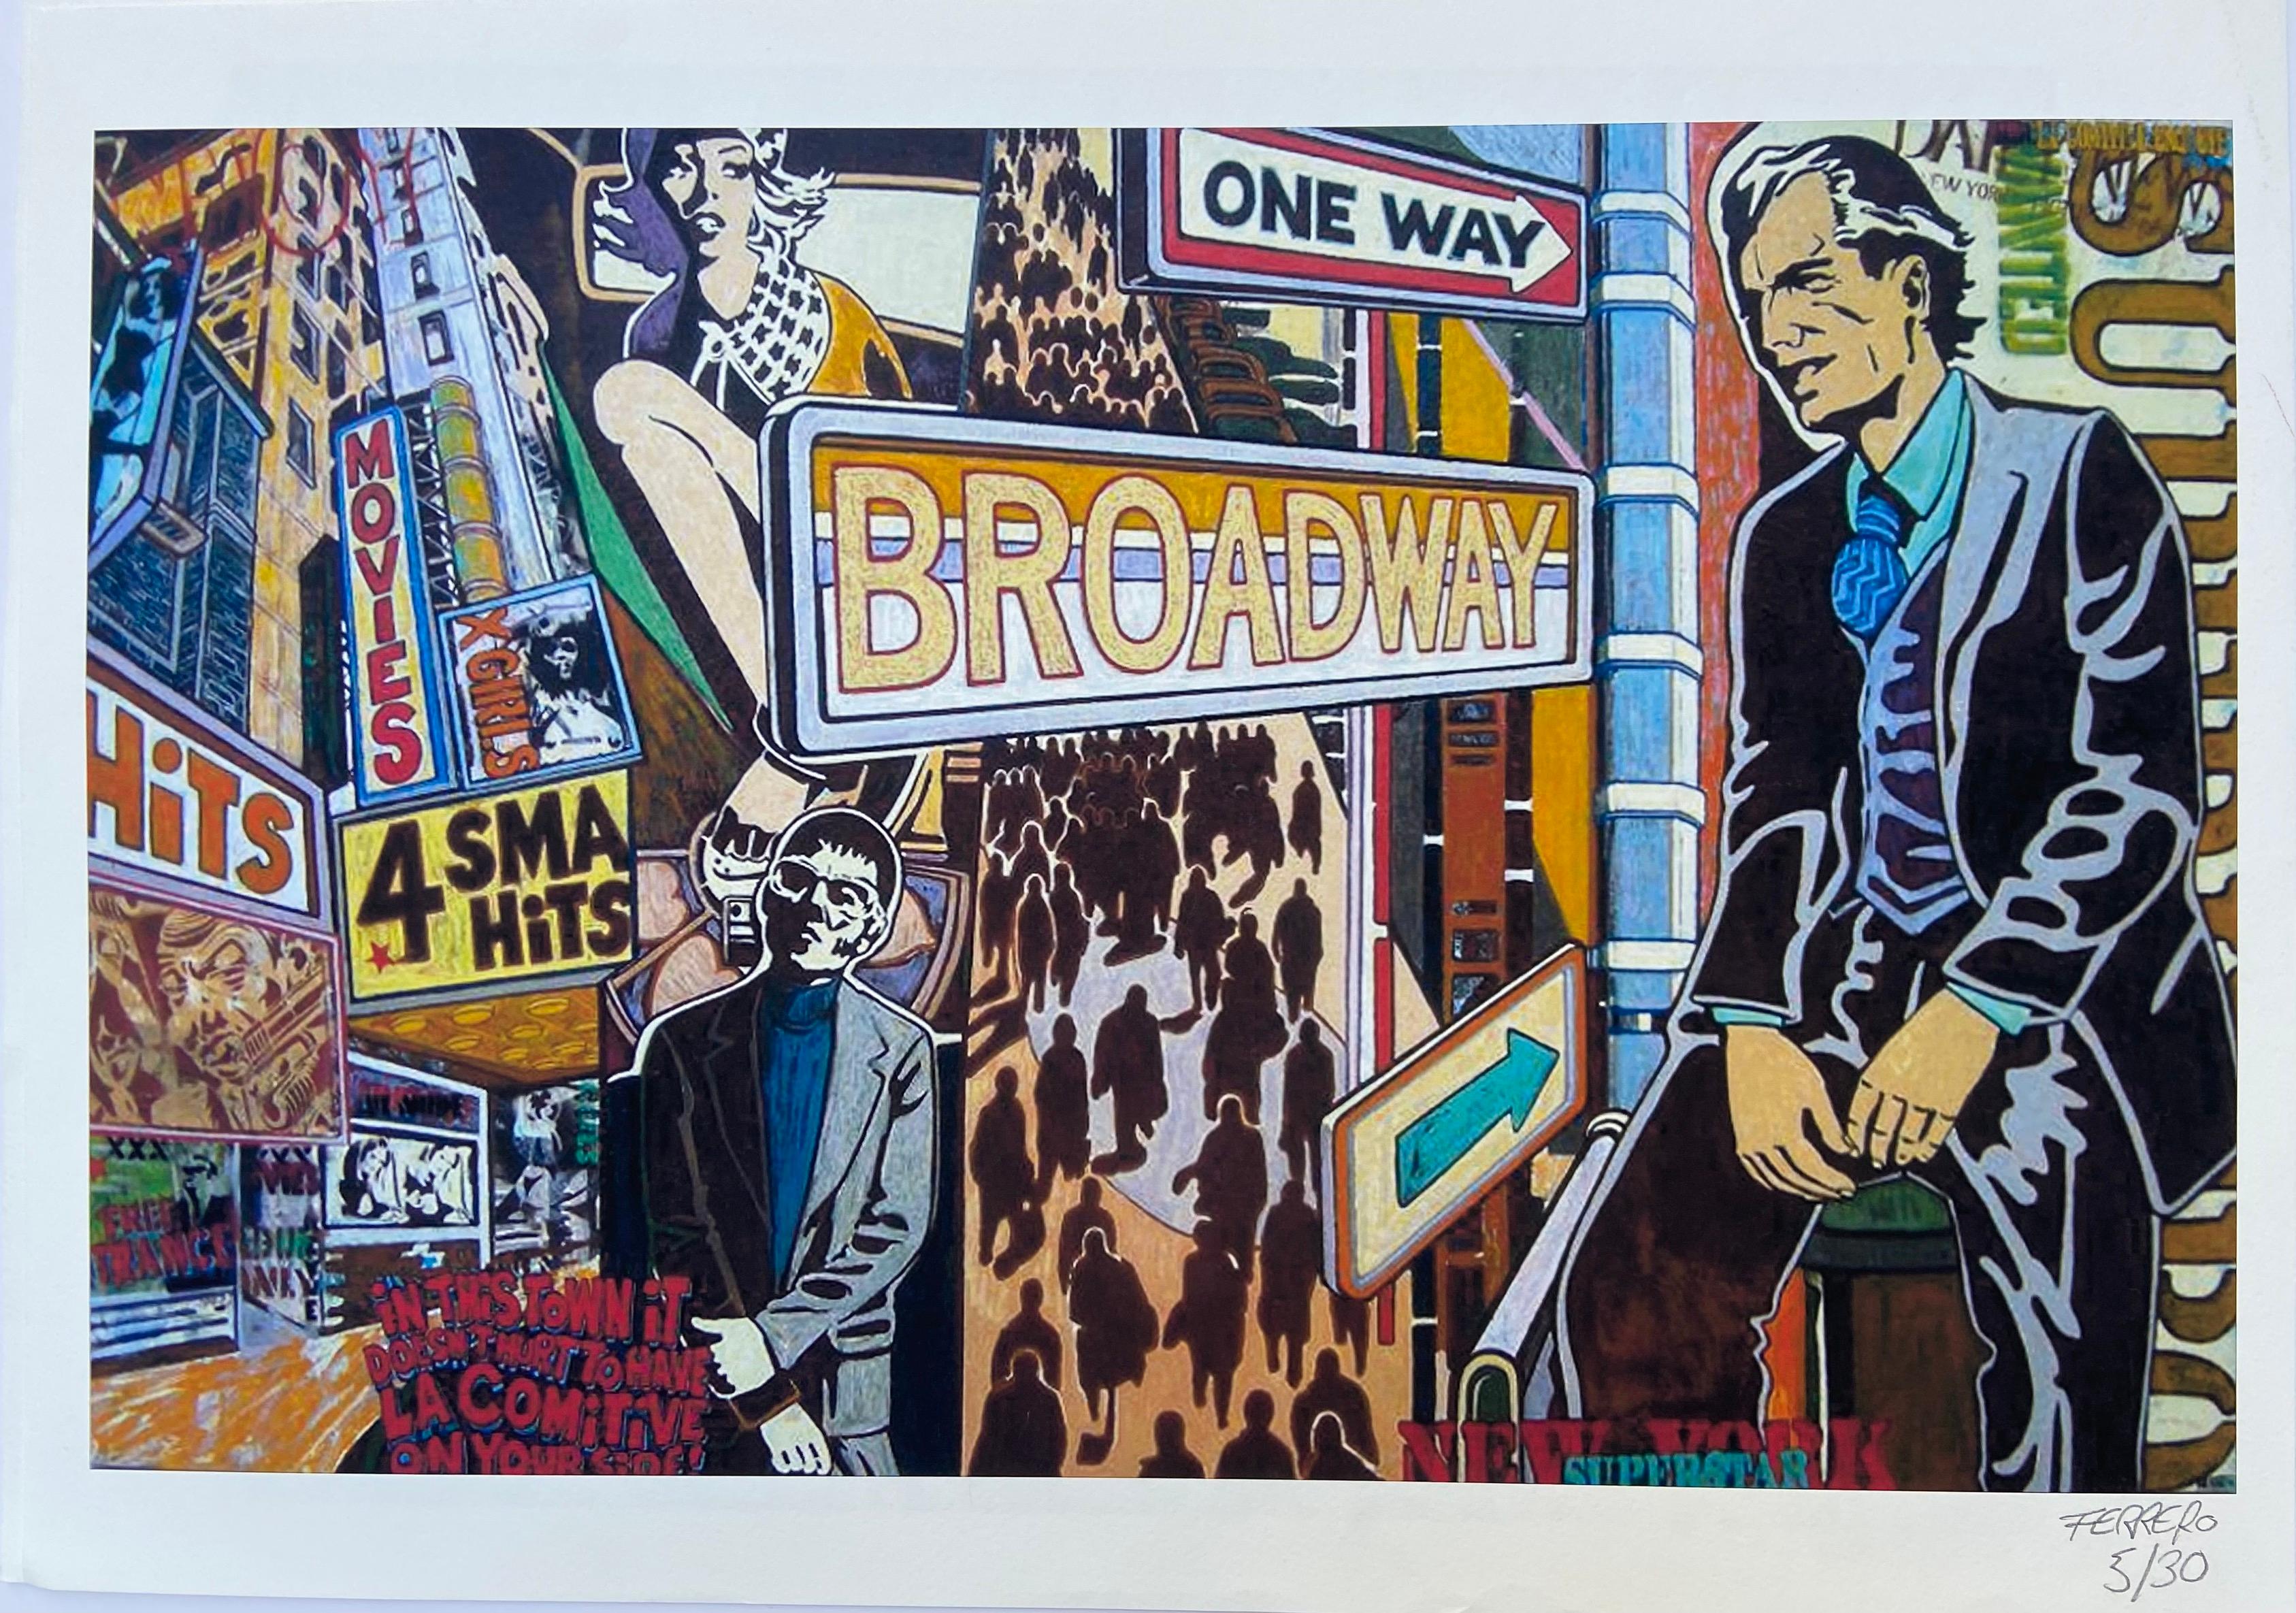 Broadway - Marc Ferrero
Hand signed and numbered lithograph out of 30
50x70cm
Circa 2015